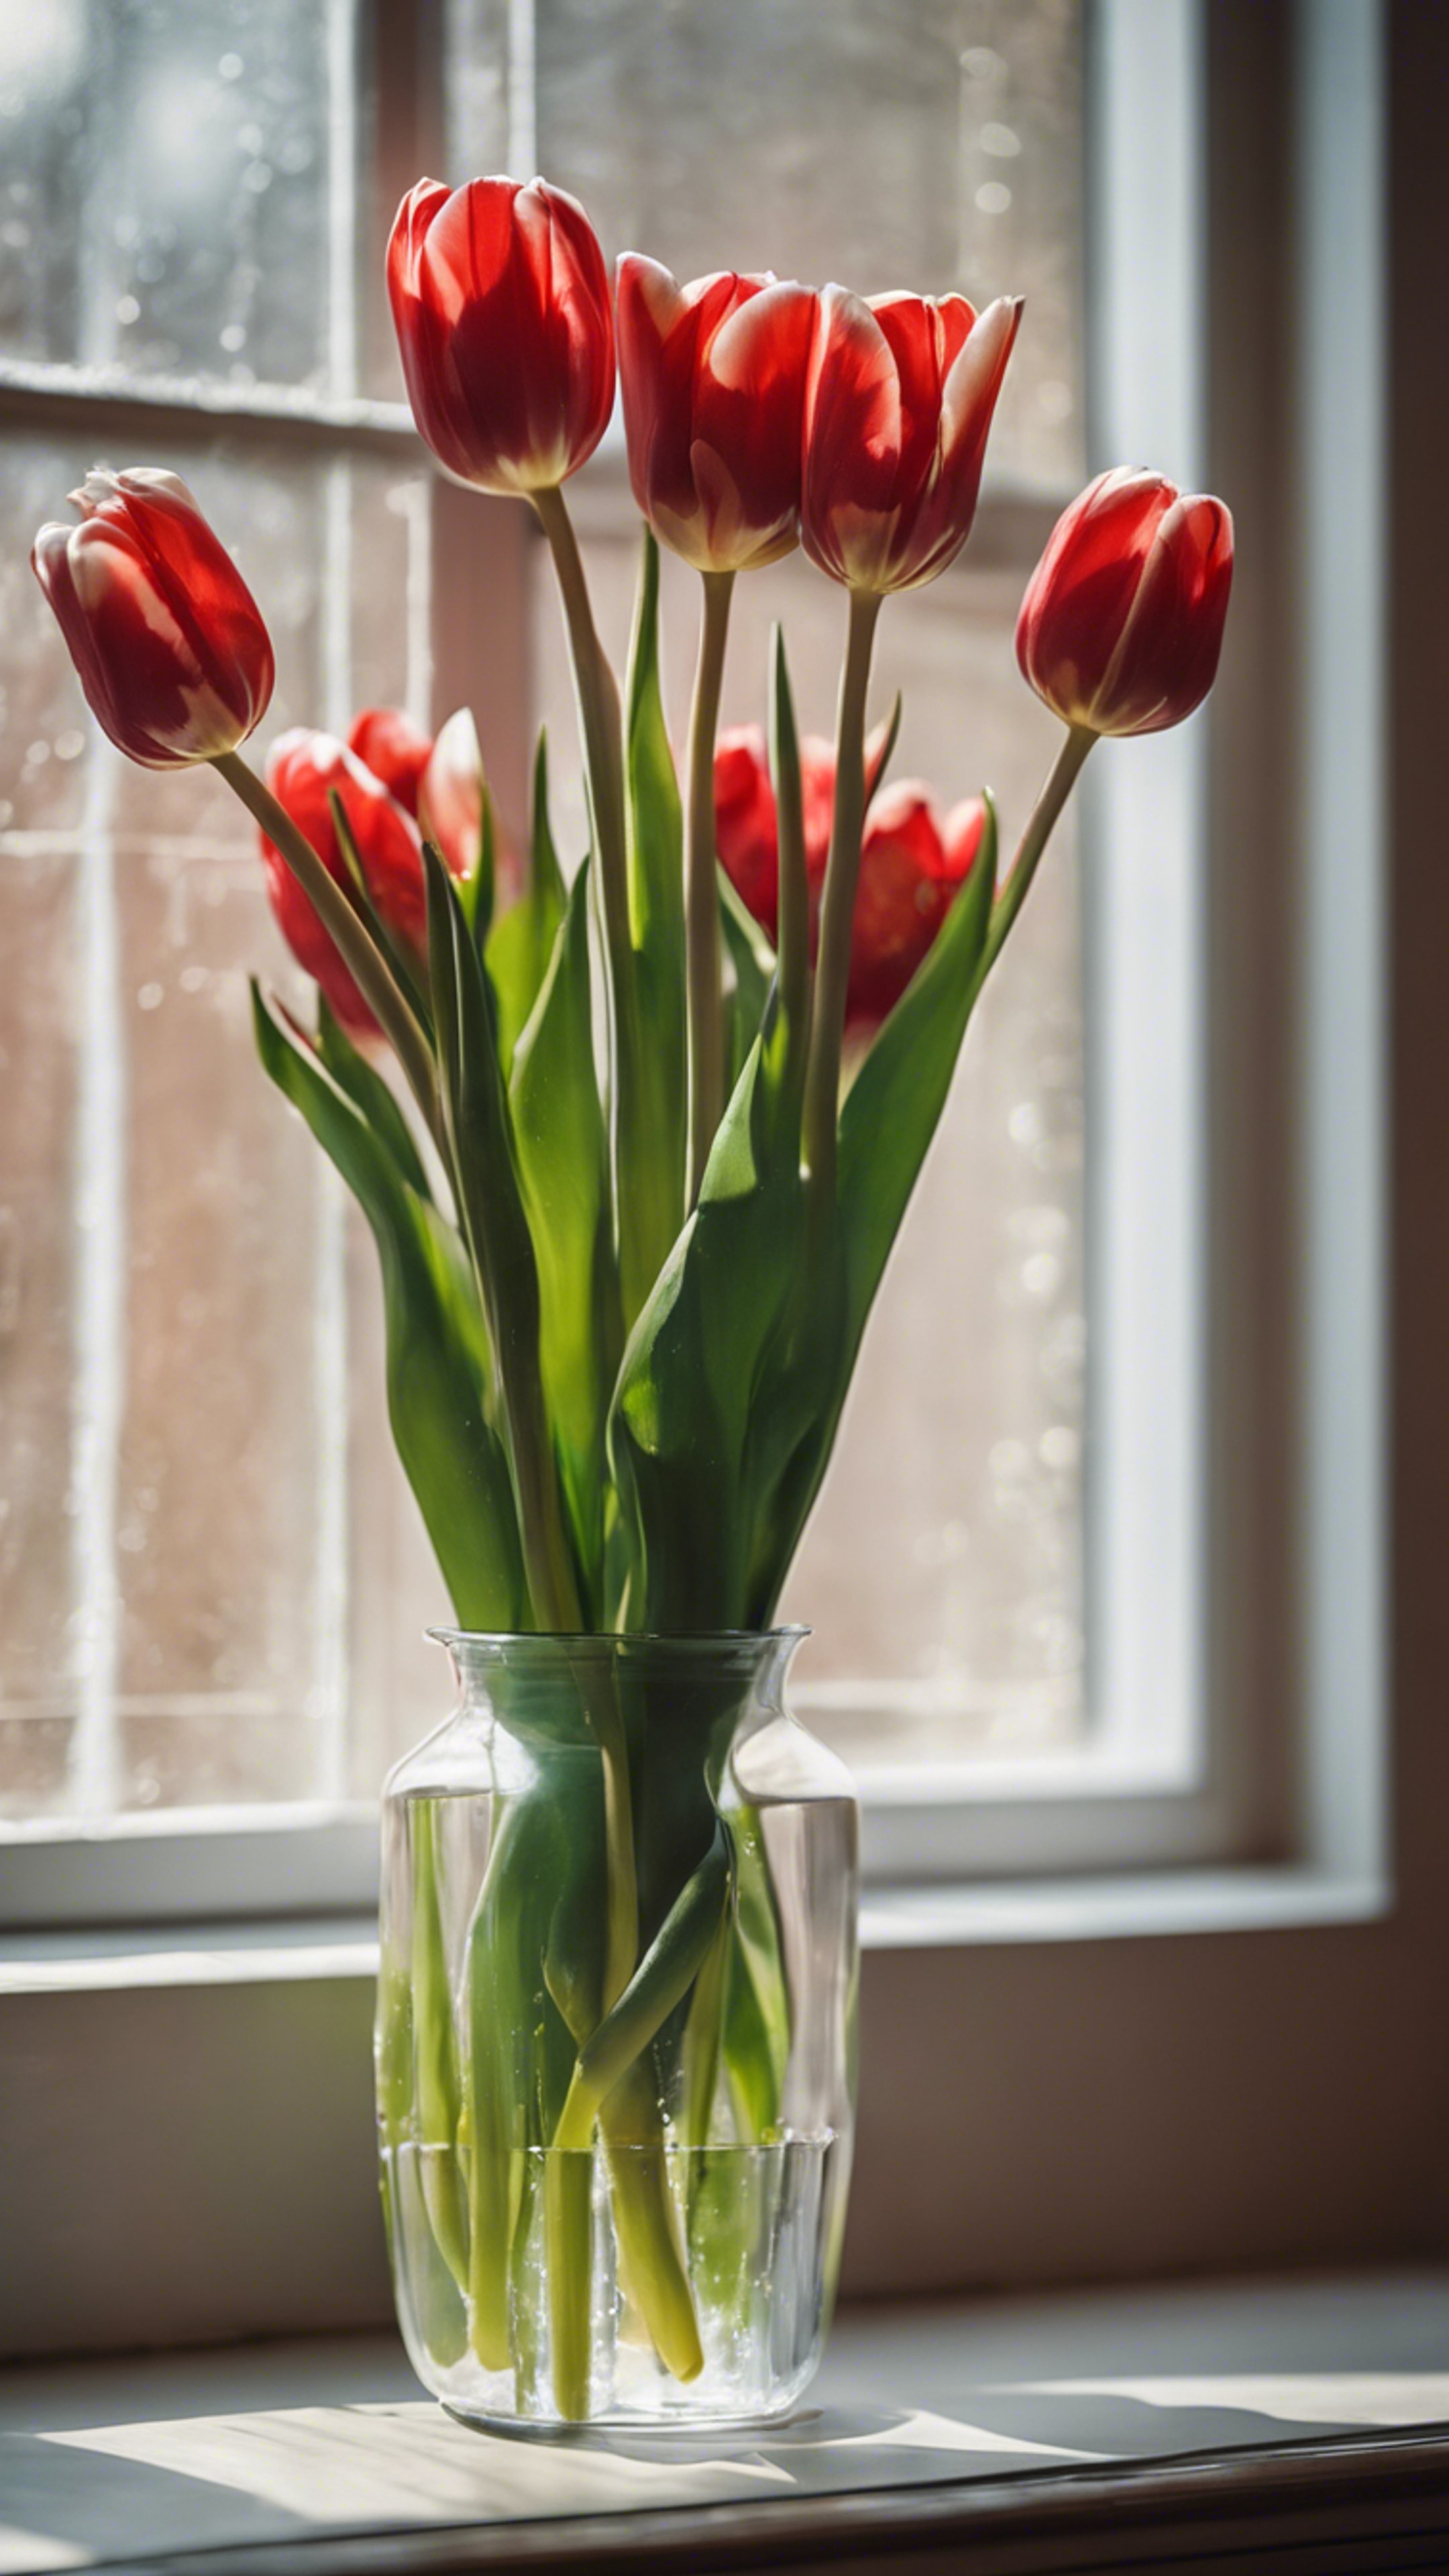 A bunch of vivid red and white tulips in a glass vase, lit by natural light. Tapéta[fc69acd6917c413b913f]